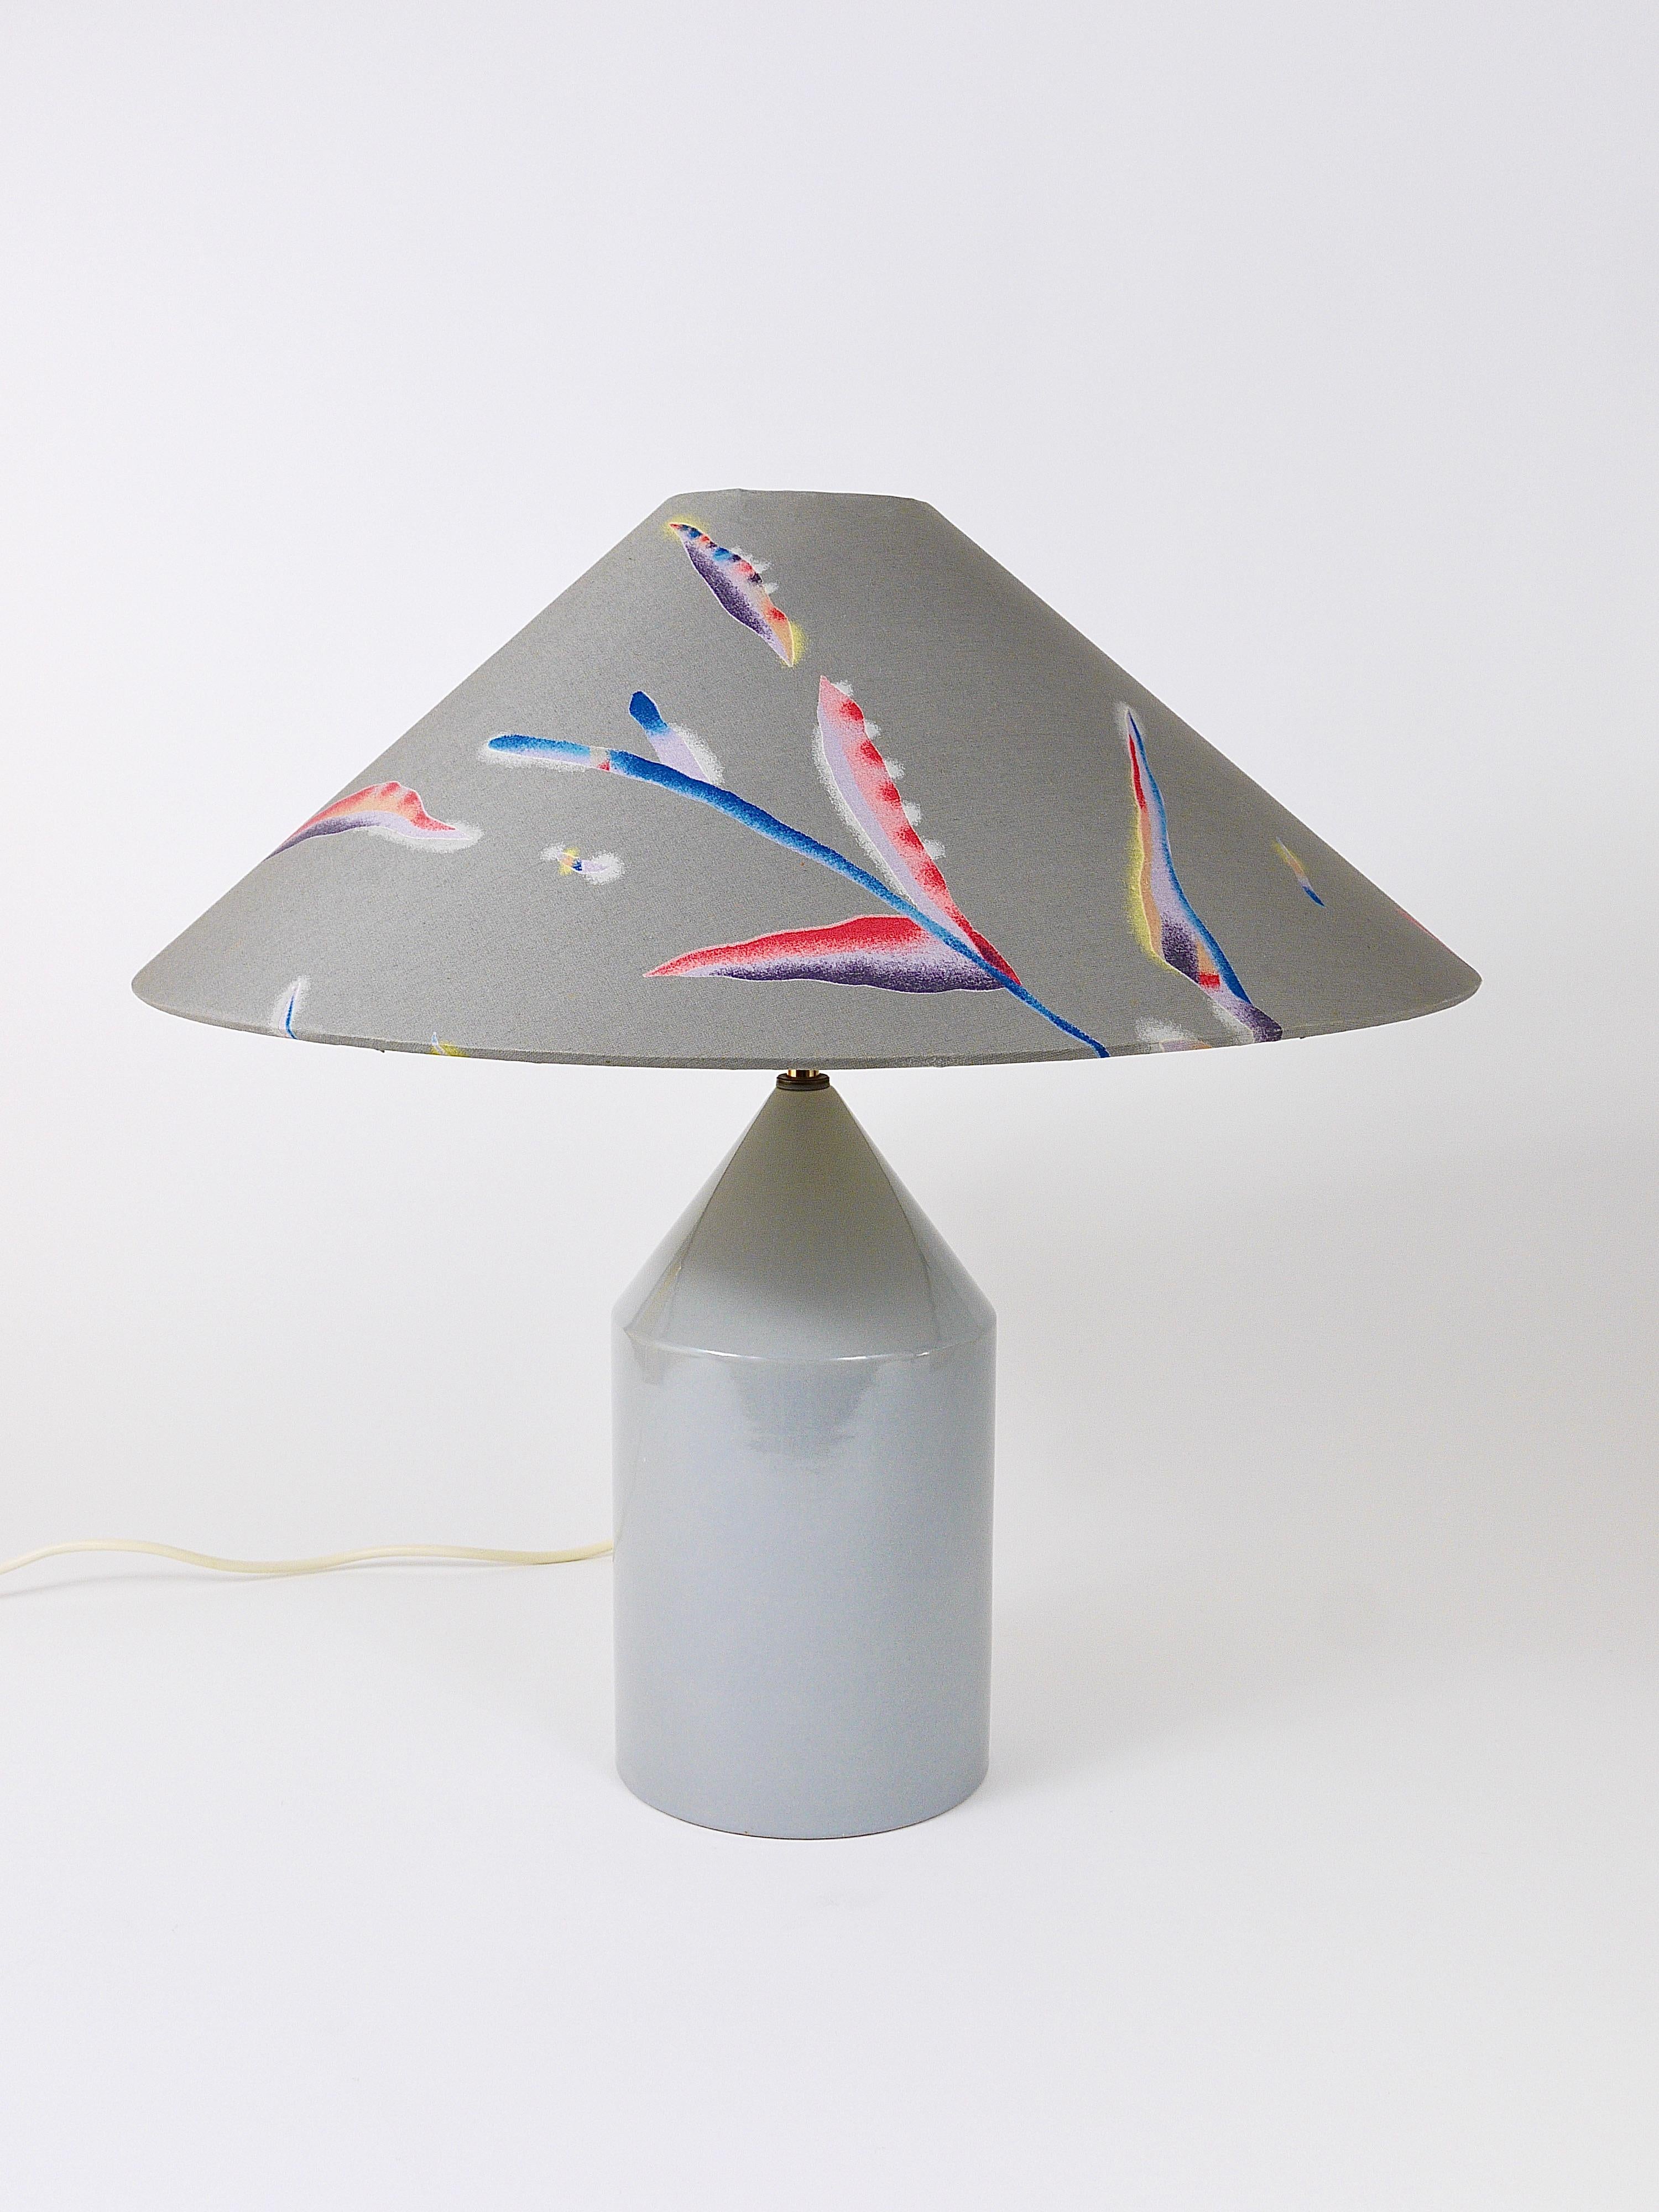 Colorful Post-Modern Table Lamp, Italy, 1980s For Sale 3